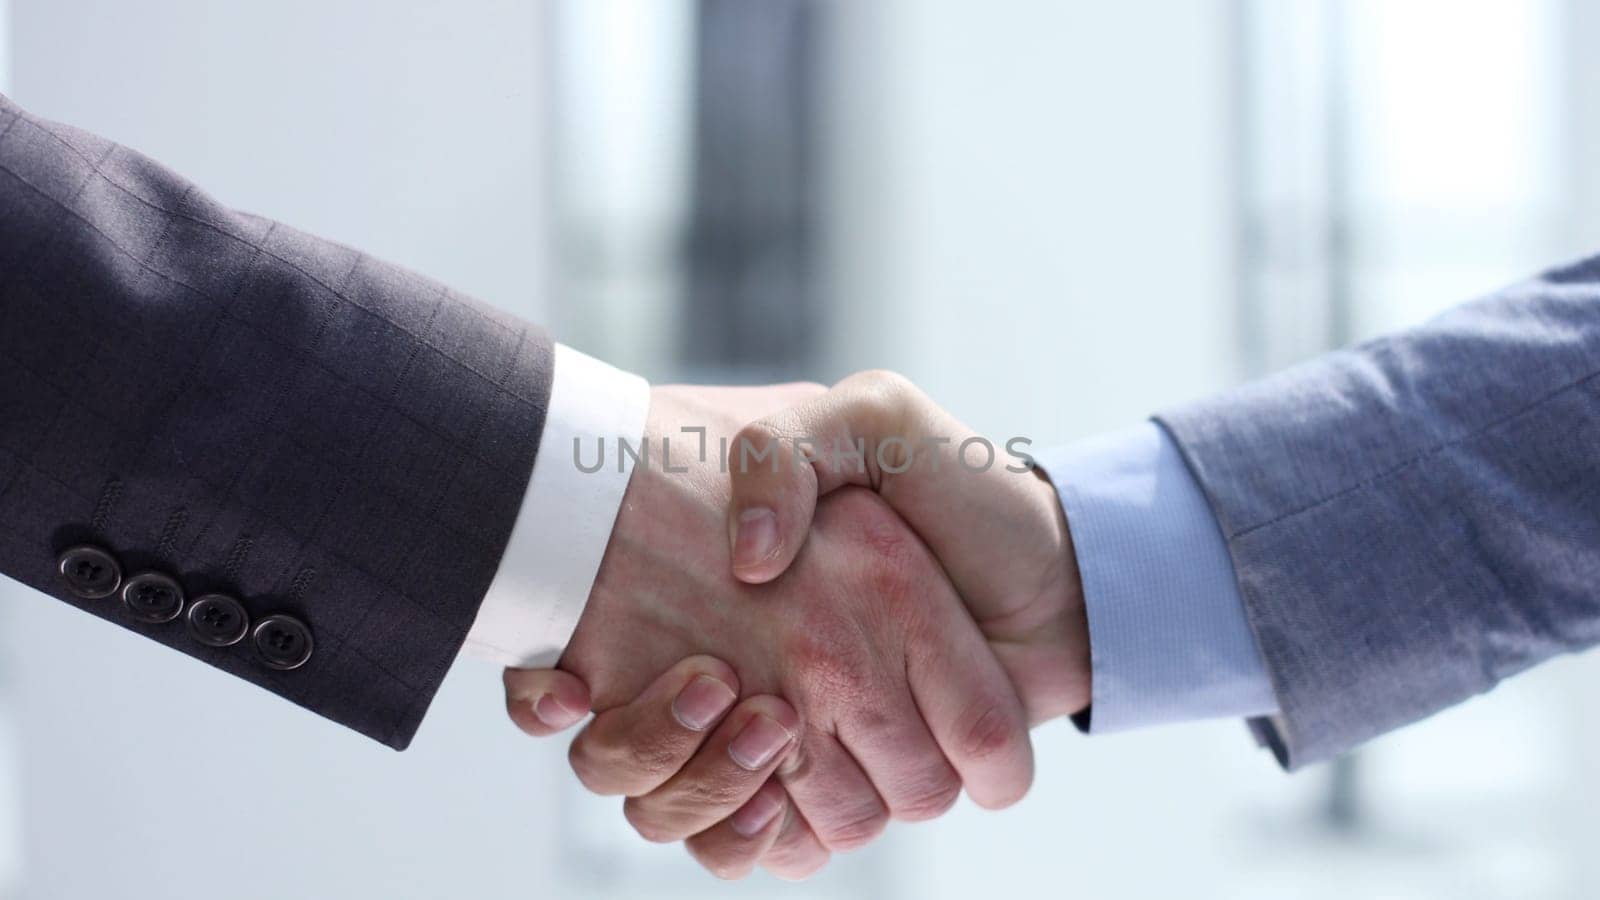 Handshake, agreement after the transaction.